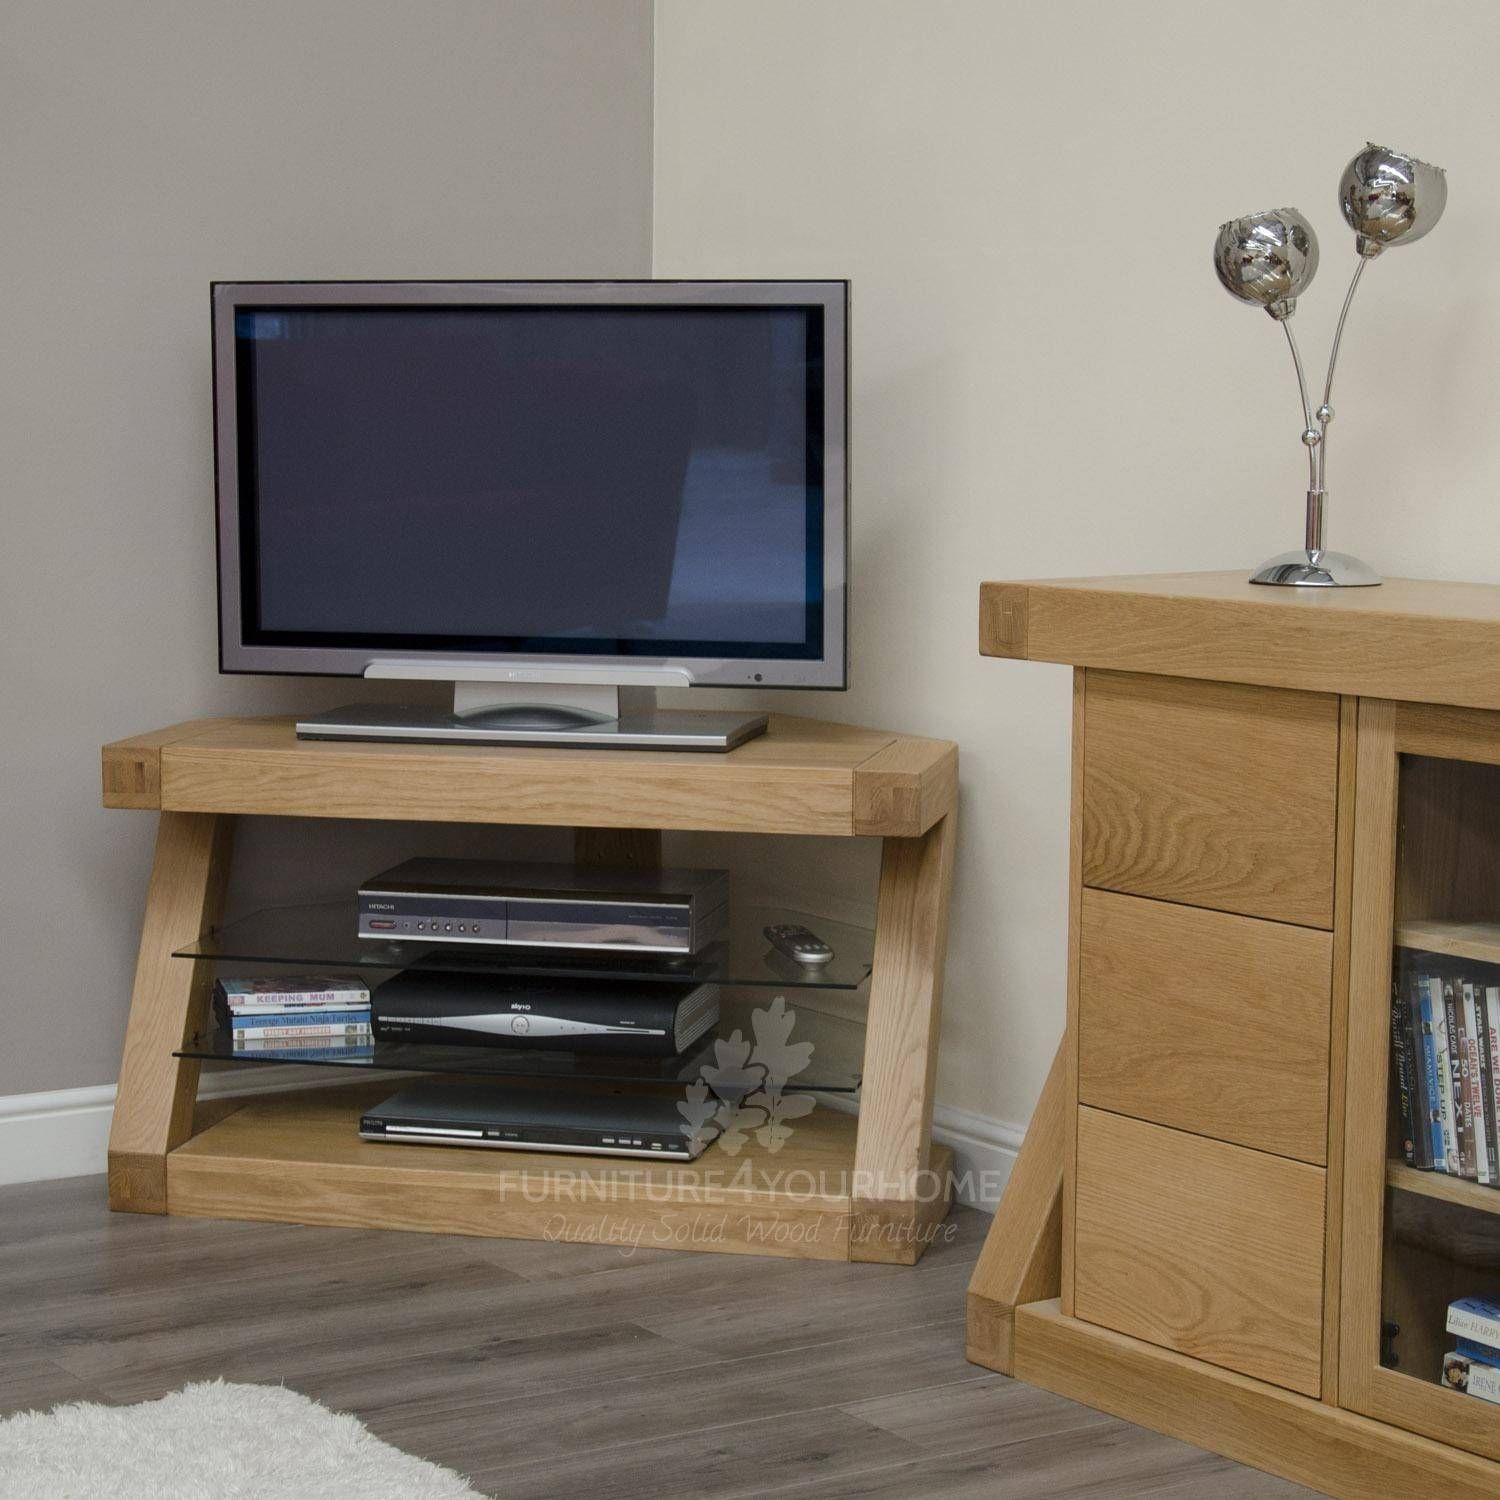 Z Solid Oak Designer Corner Tv Unit | Furniture4yourhome With Regard To Oak Tv Cabinets For Flat Screens (View 11 of 15)